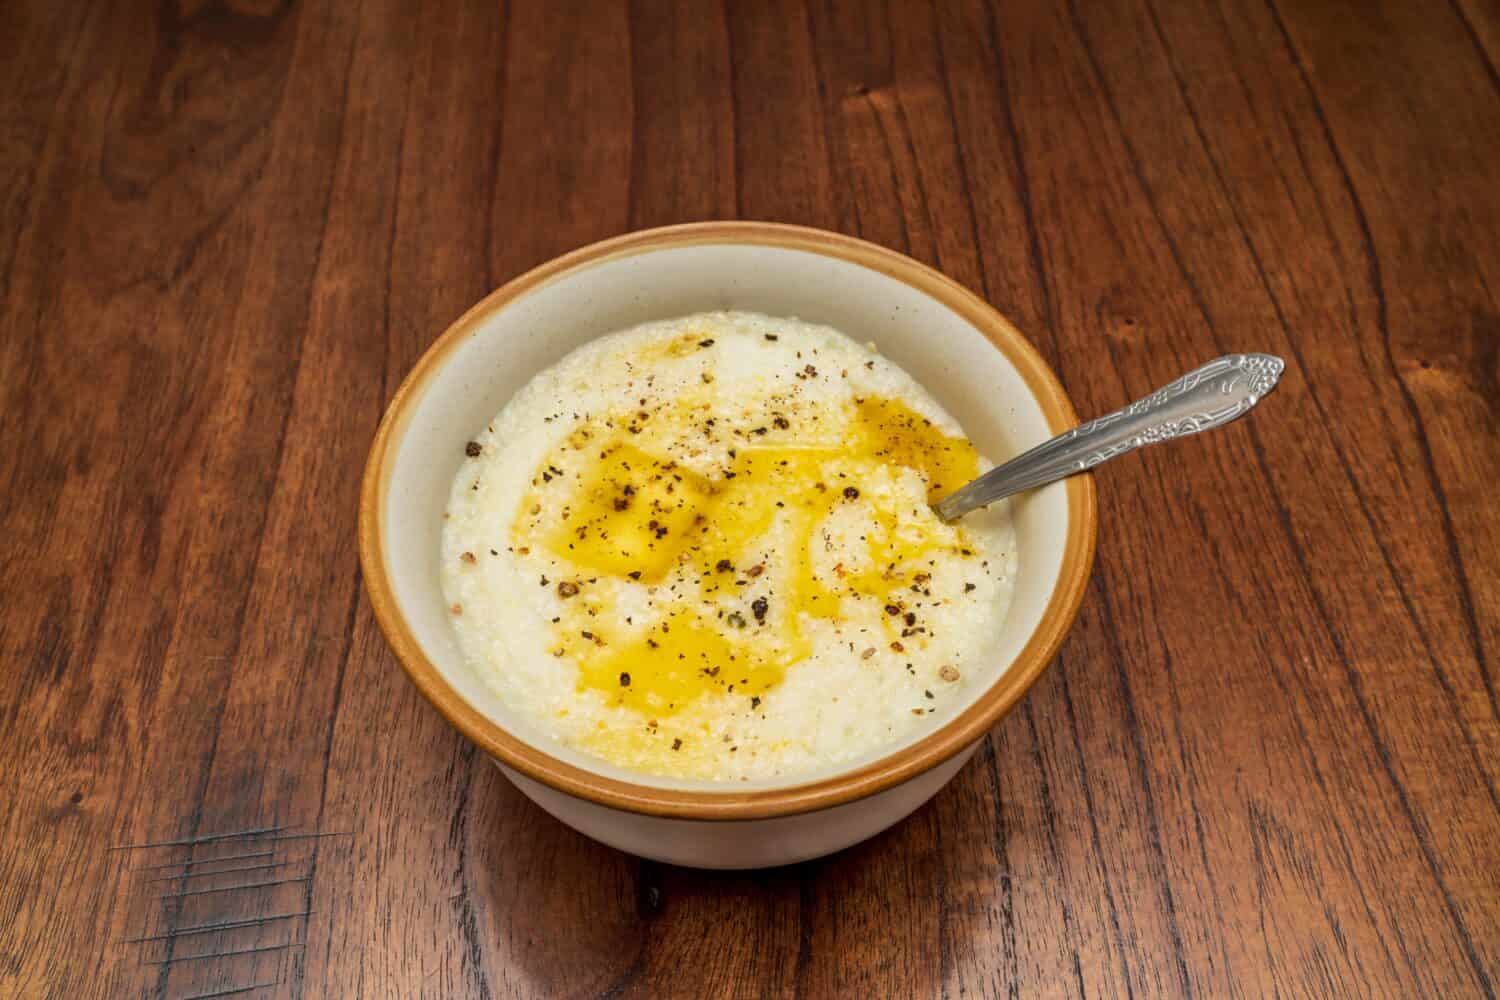 A delicious bowl of grits with melted butter and freshly cracked pepper